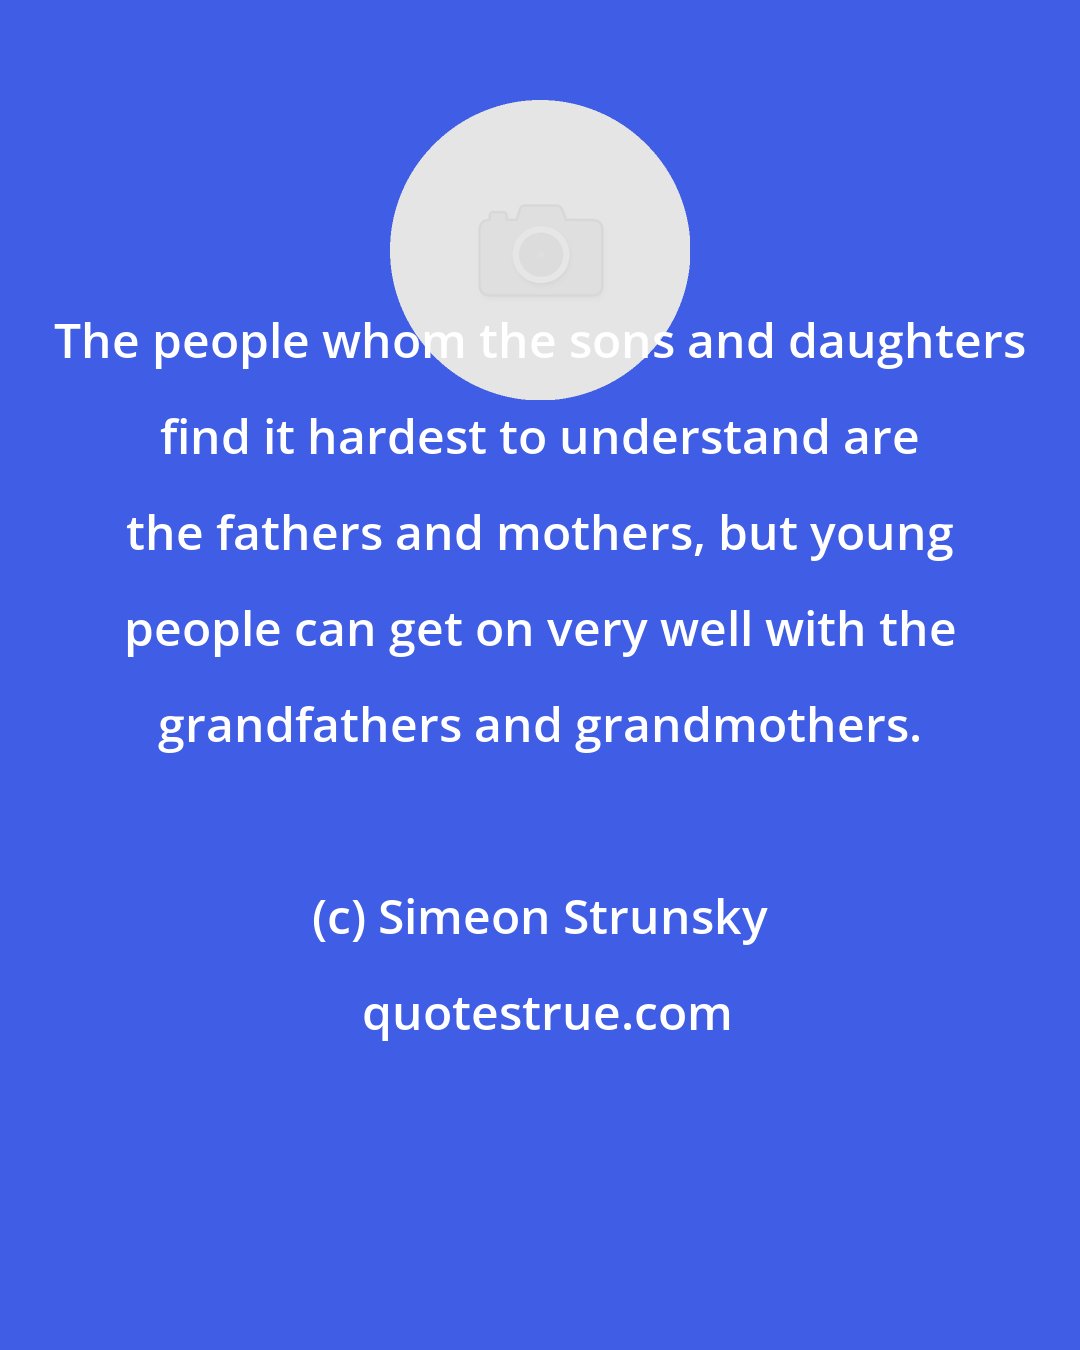 Simeon Strunsky: The people whom the sons and daughters find it hardest to understand are the fathers and mothers, but young people can get on very well with the grandfathers and grandmothers.